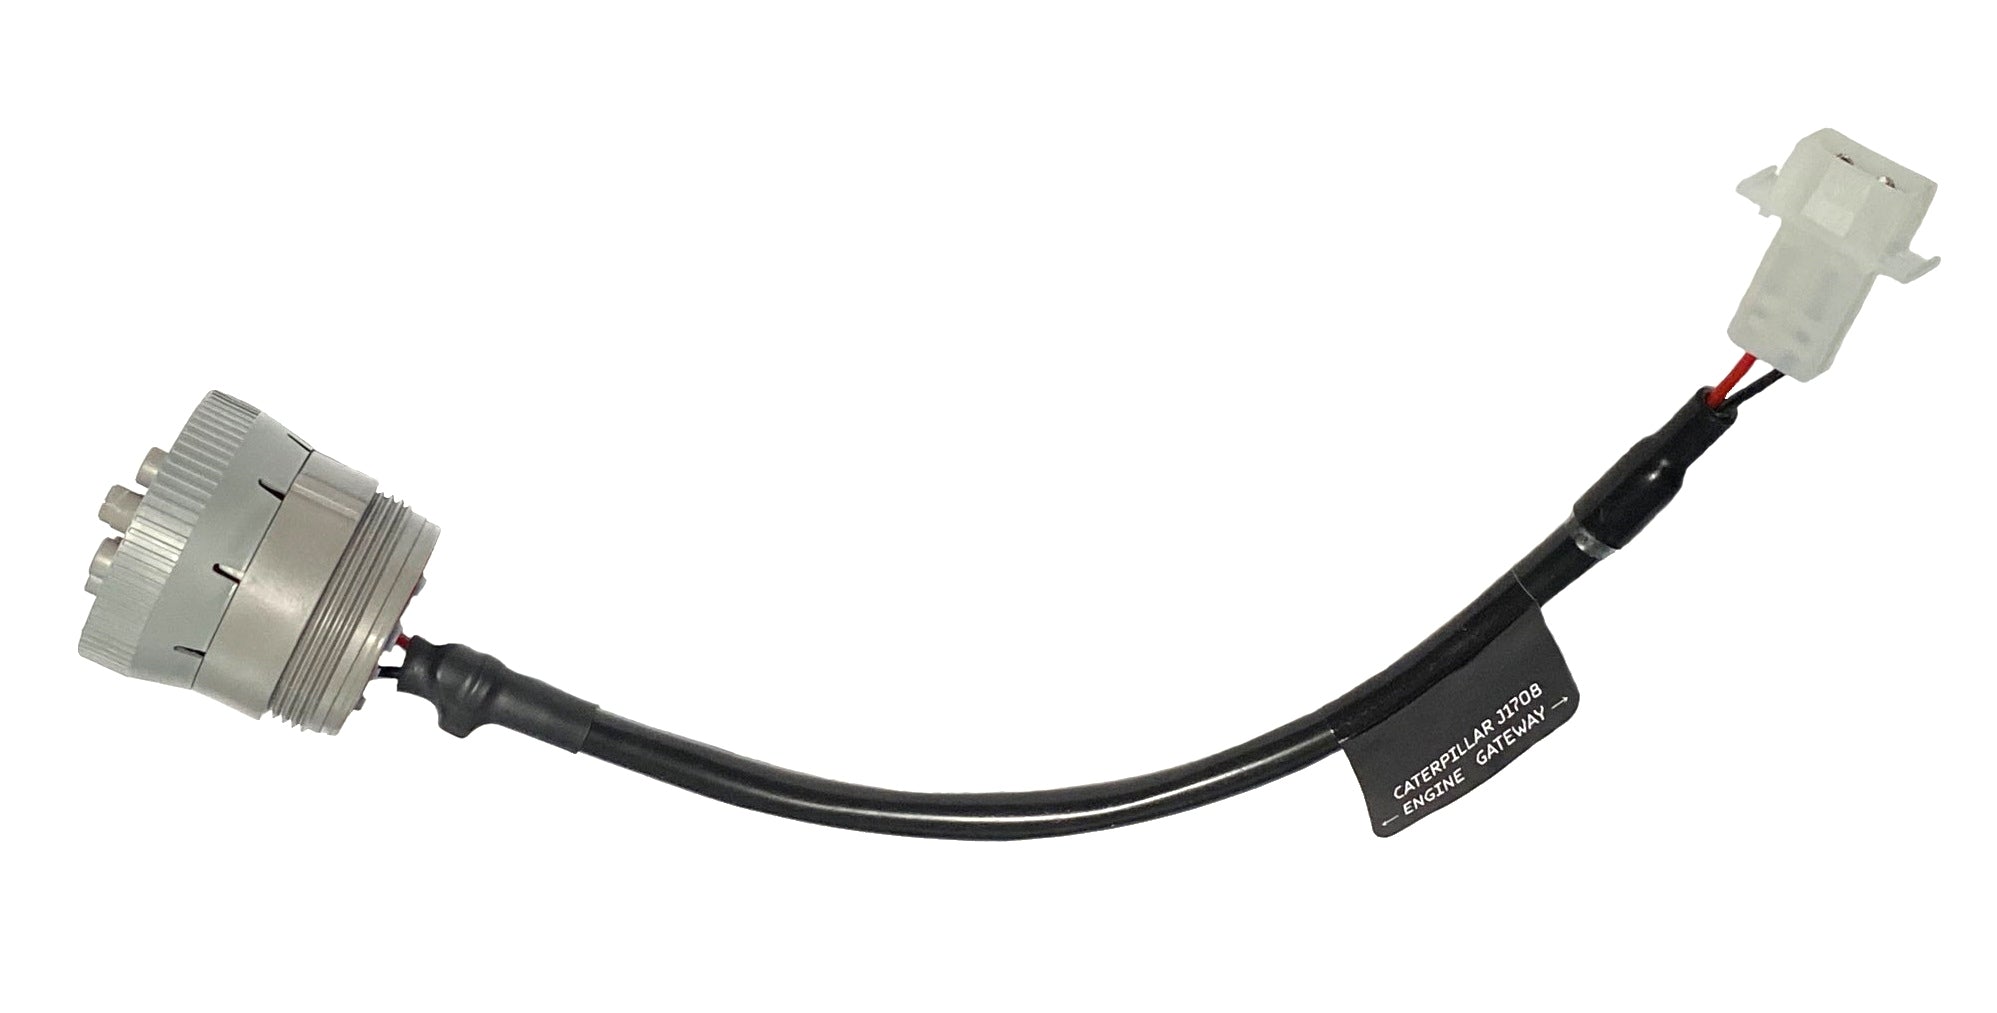 Cable for engine gateway (J1708)